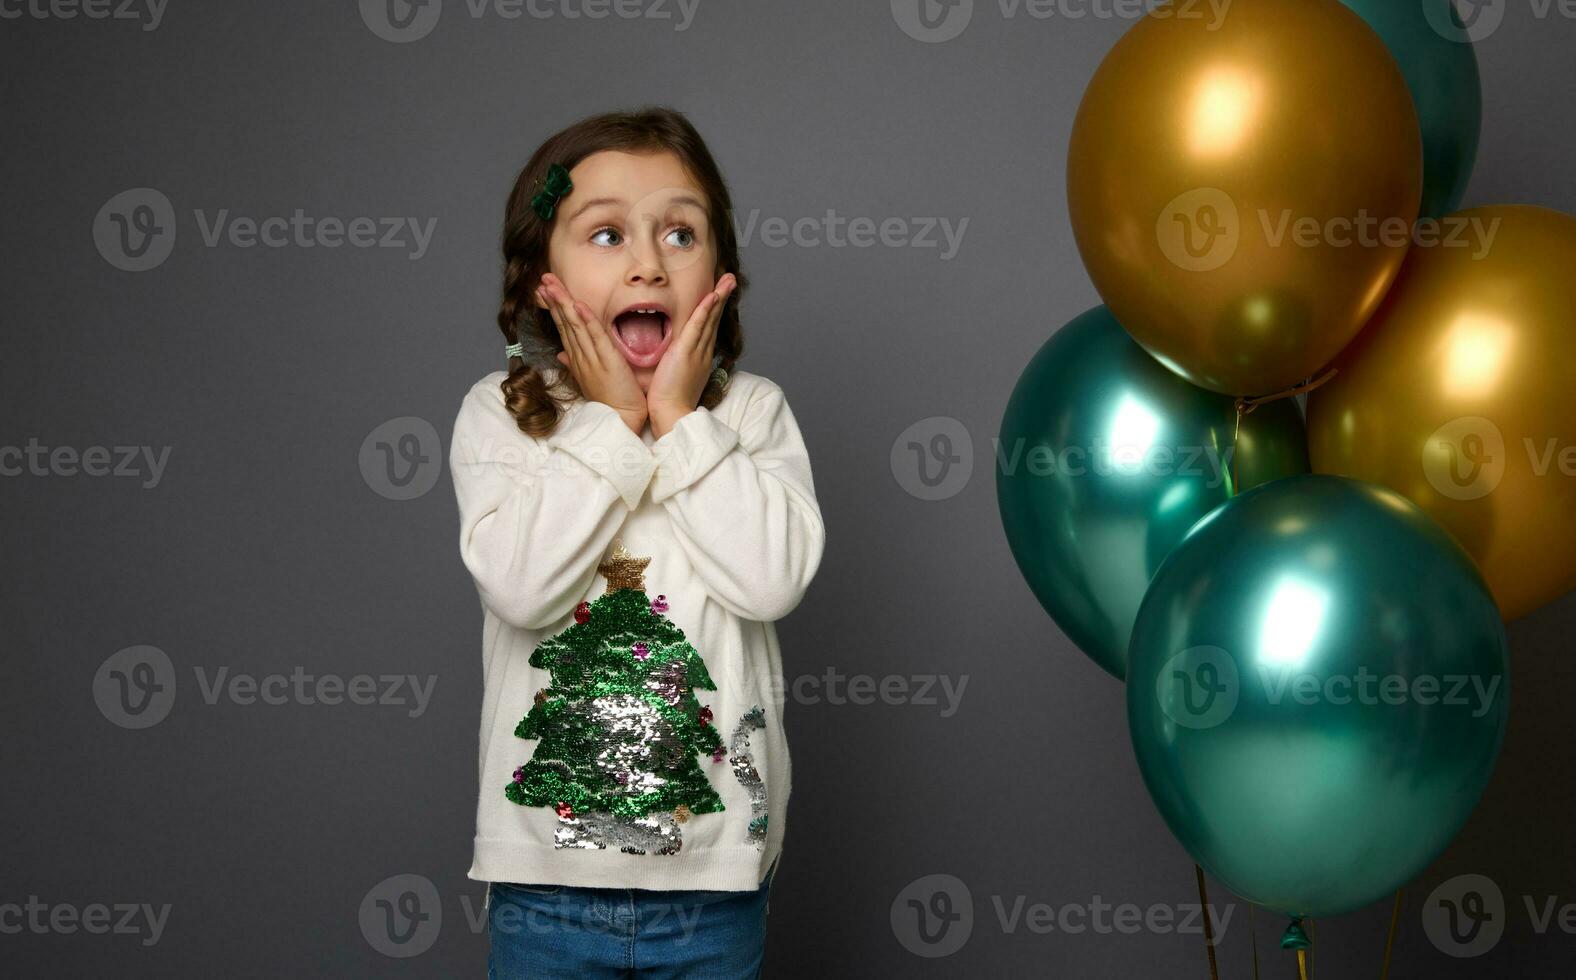 Happy surprised baby girl in sweater with shiny Christmas tree, rejoicing standing near inflated golden and green metallic air balloons against gray background with copy space. New Year concept photo